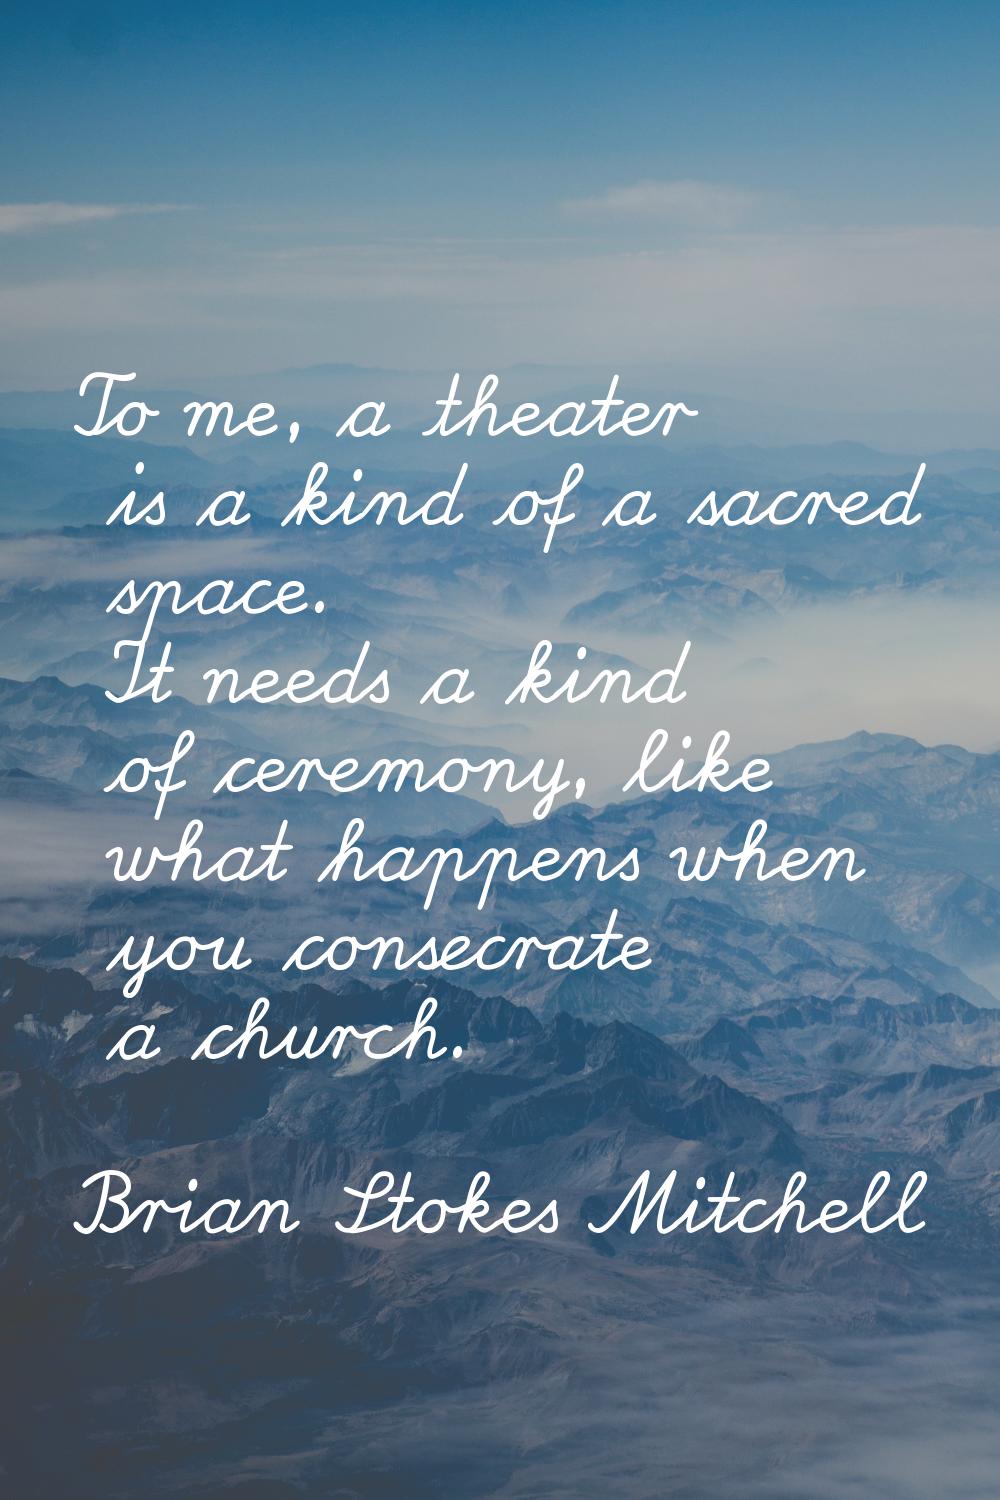 To me, a theater is a kind of a sacred space. It needs a kind of ceremony, like what happens when y